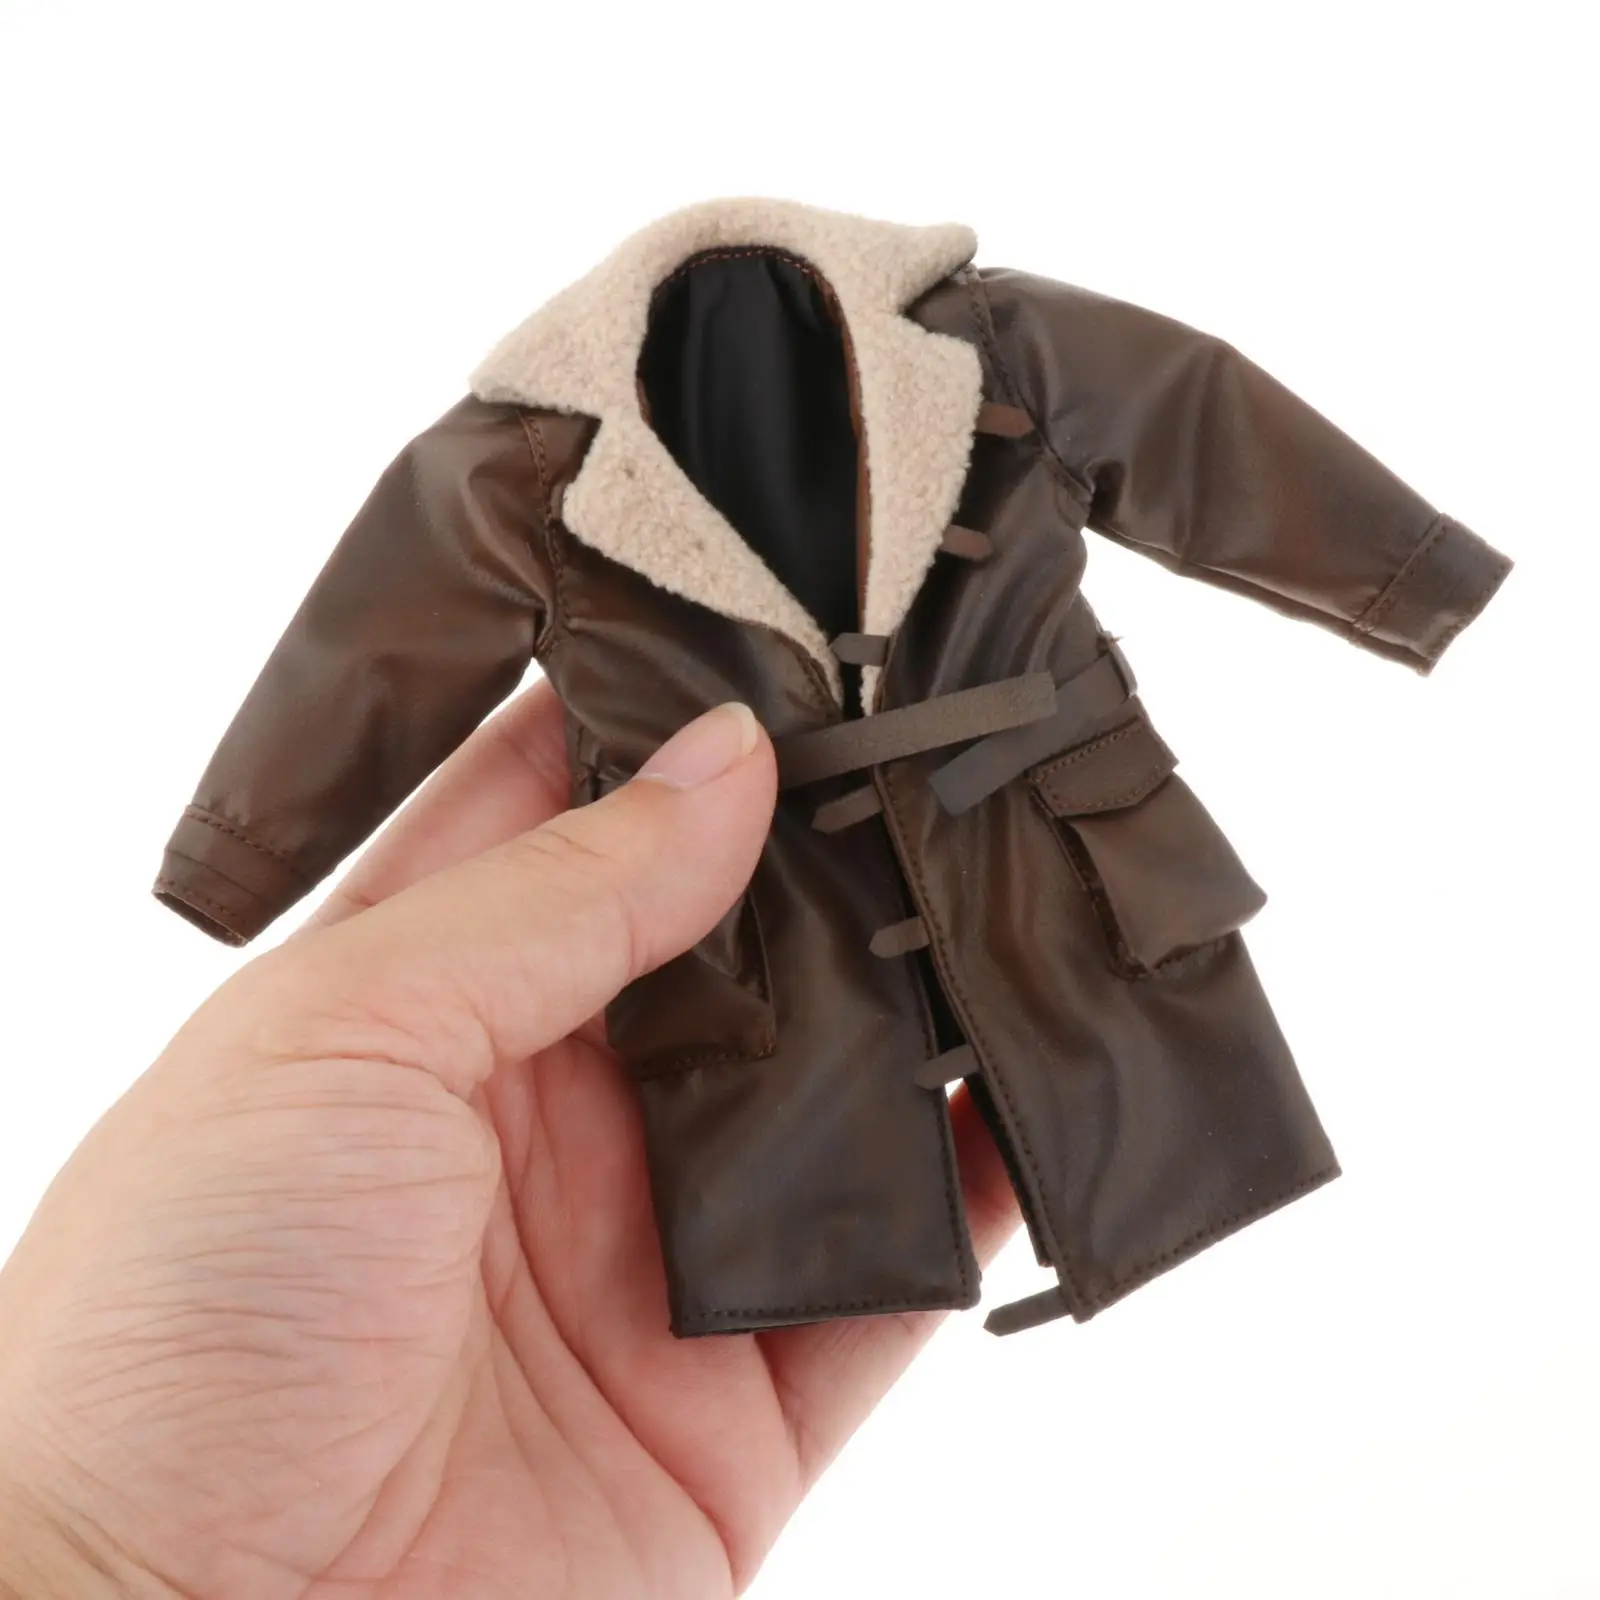 

1:10 Trench Coat Handmade Doll Clothes Costume Miniature Clothing for Male Female Soldiers Figures Dress up Doll Model Accs